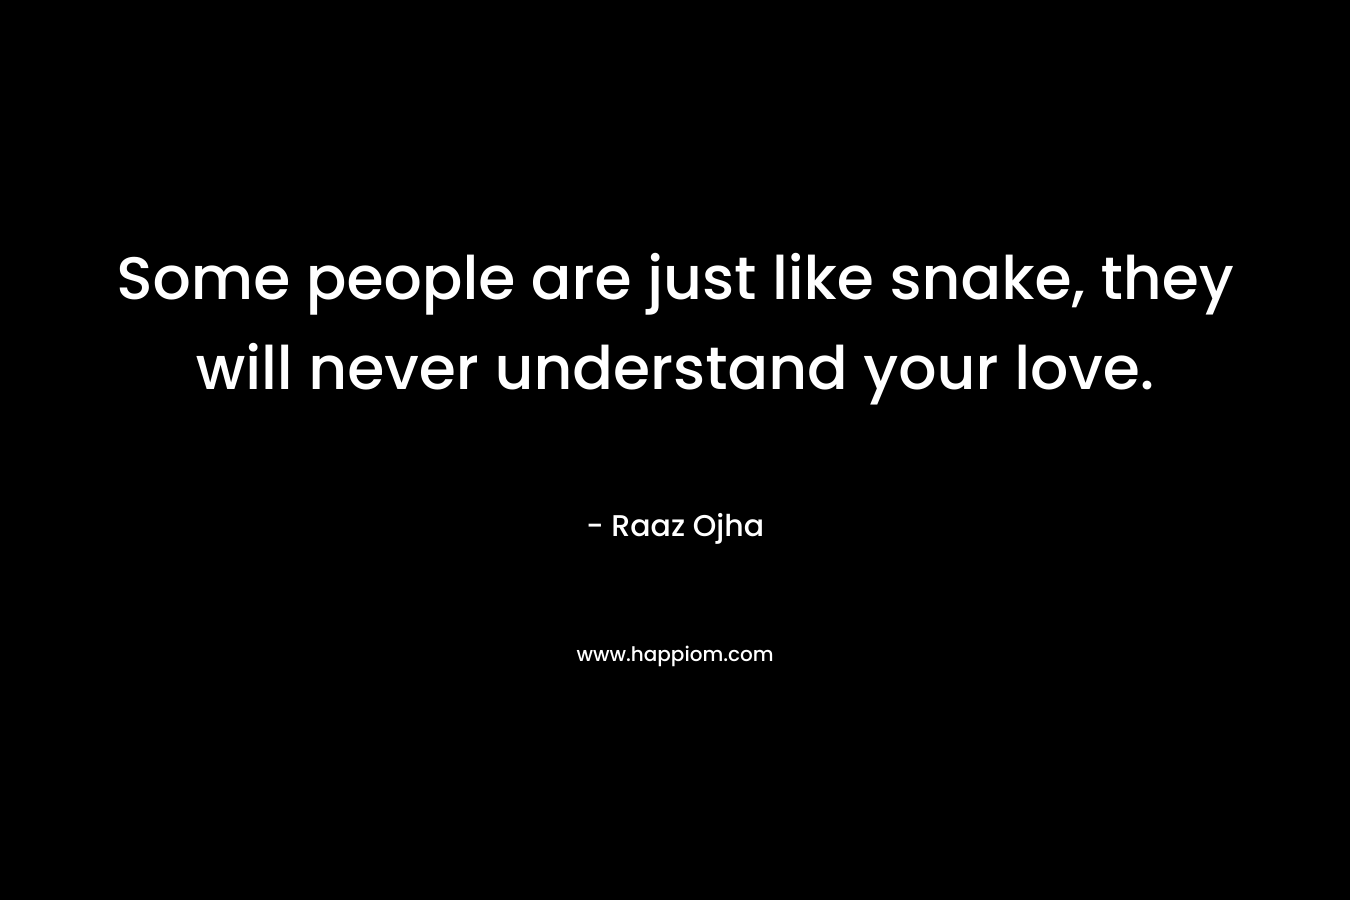 Some people are just like snake, they will never understand your love. – Raaz Ojha